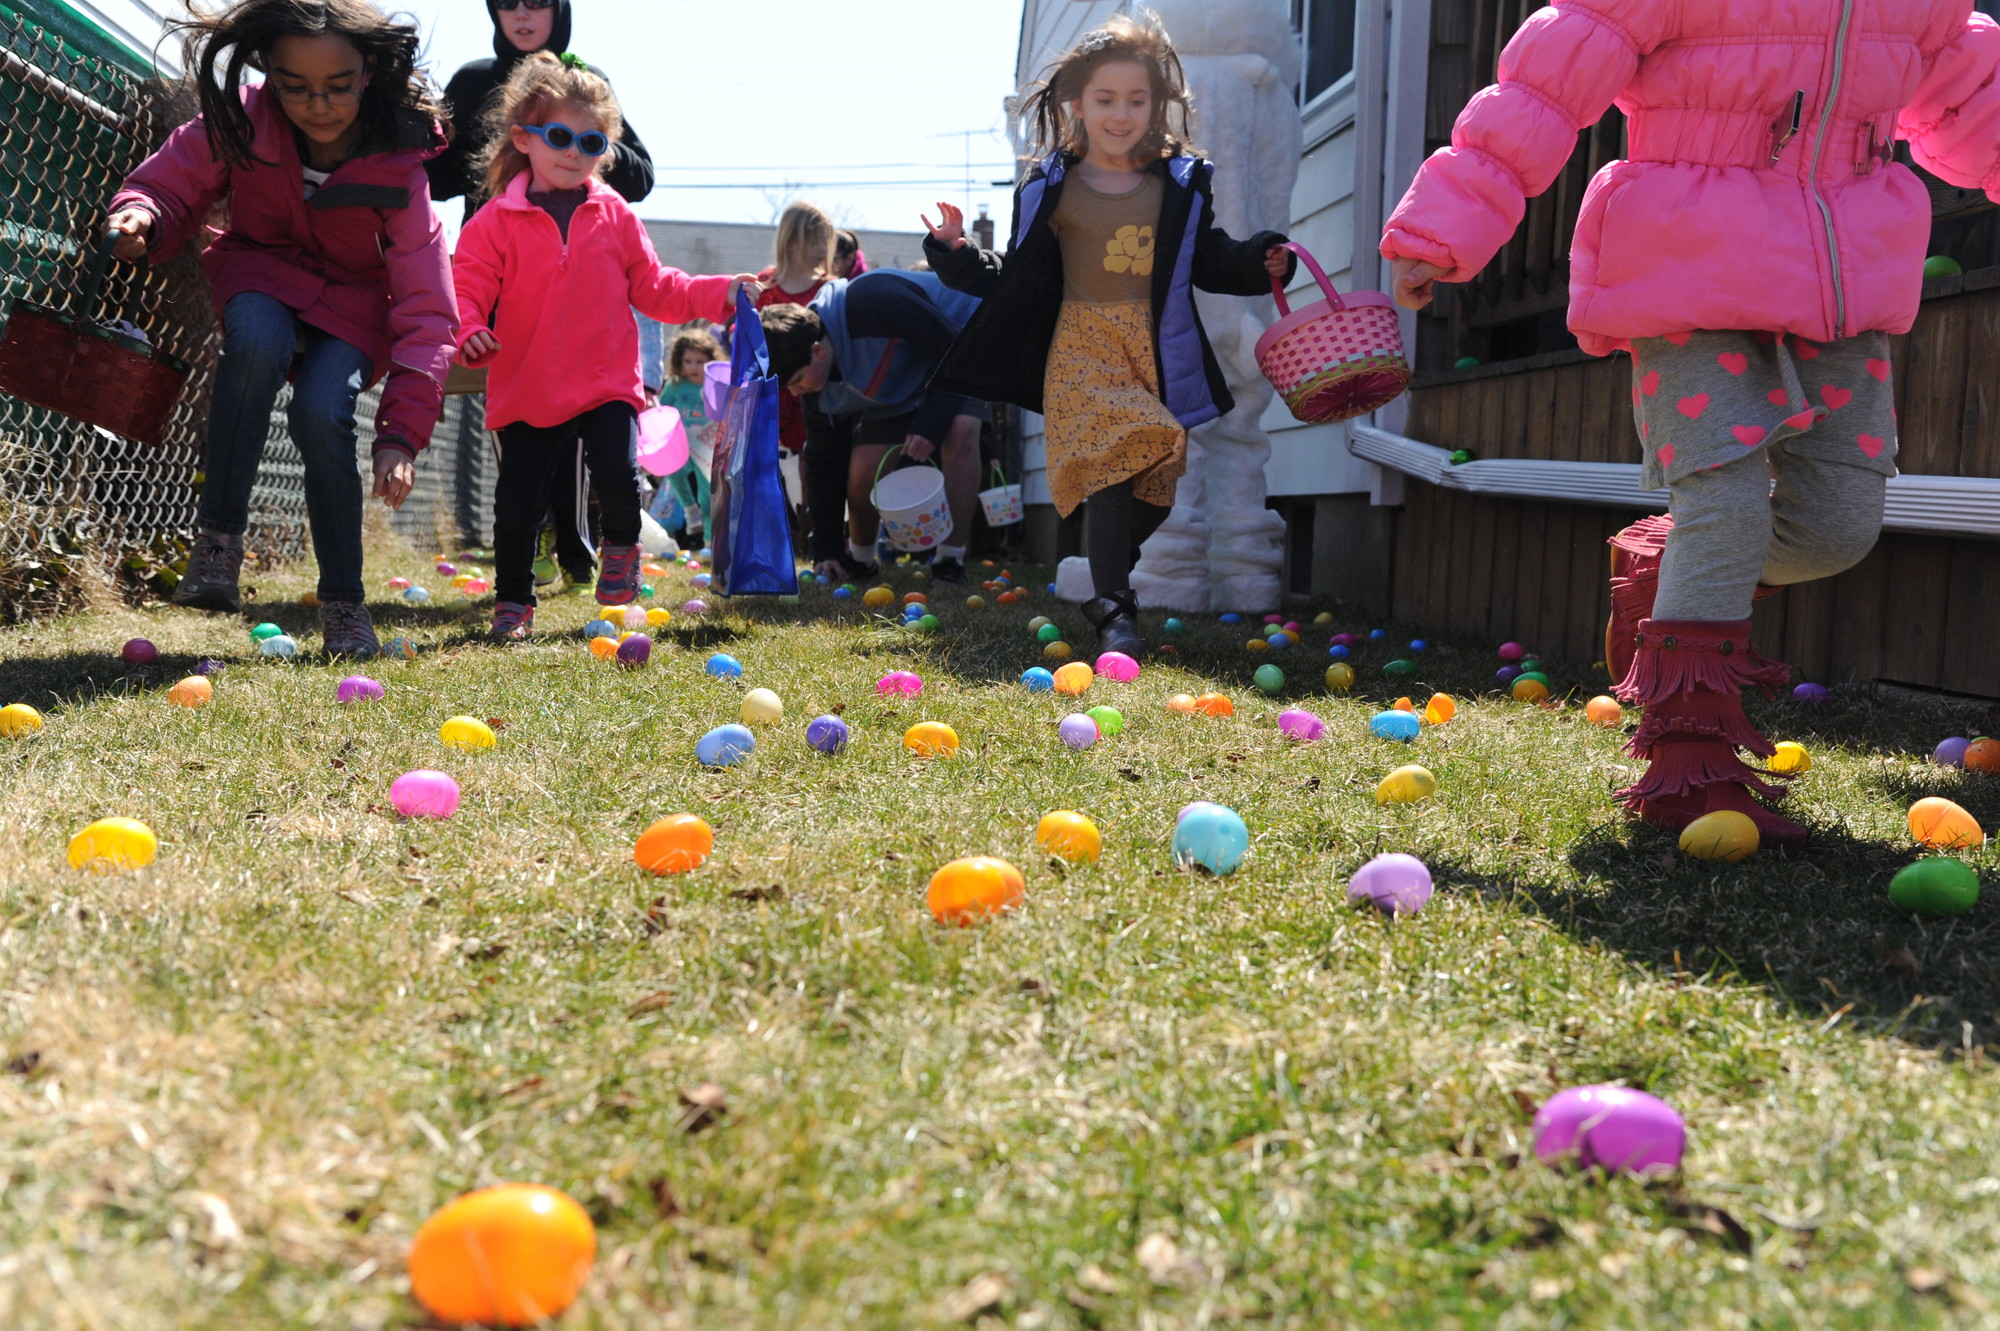 Diane Radtke’s annual egg hunt in her Albermarle Avenue home started with a flourish on April 2.                          Photo by Donovan Berthoud/Herald